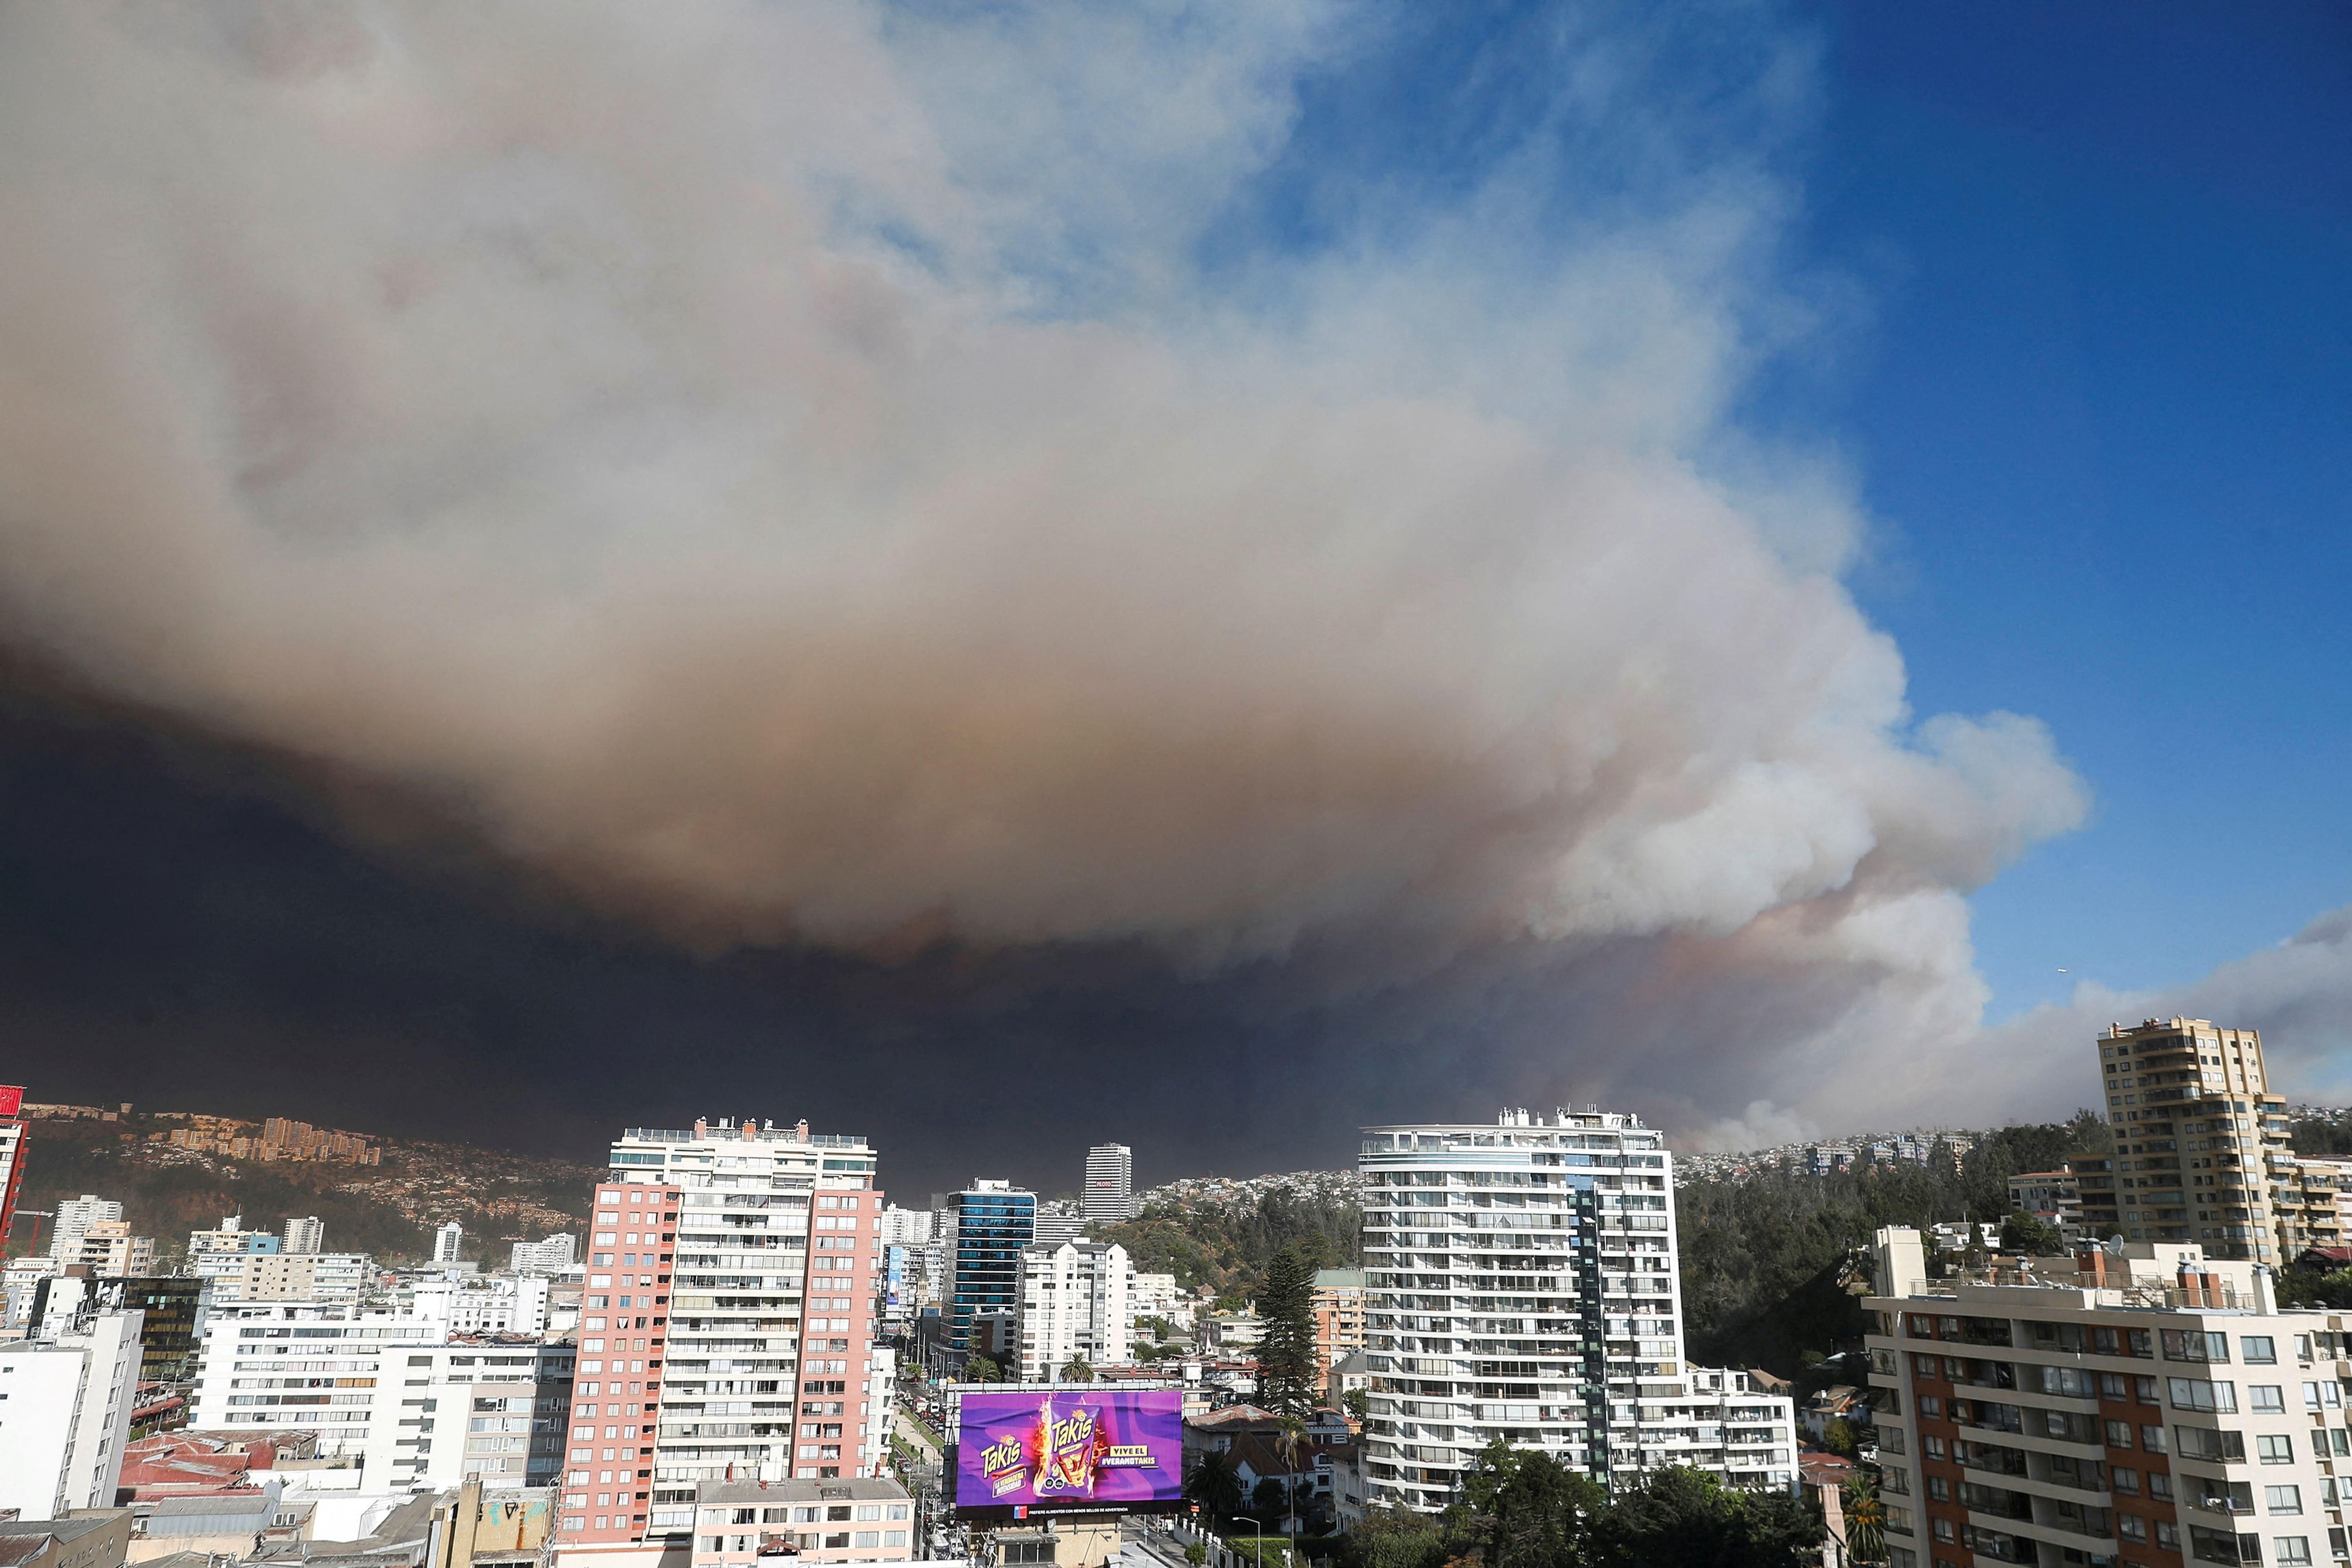 A thick cloud of smoke covered cities like Viña del Mar. (REUTERS).